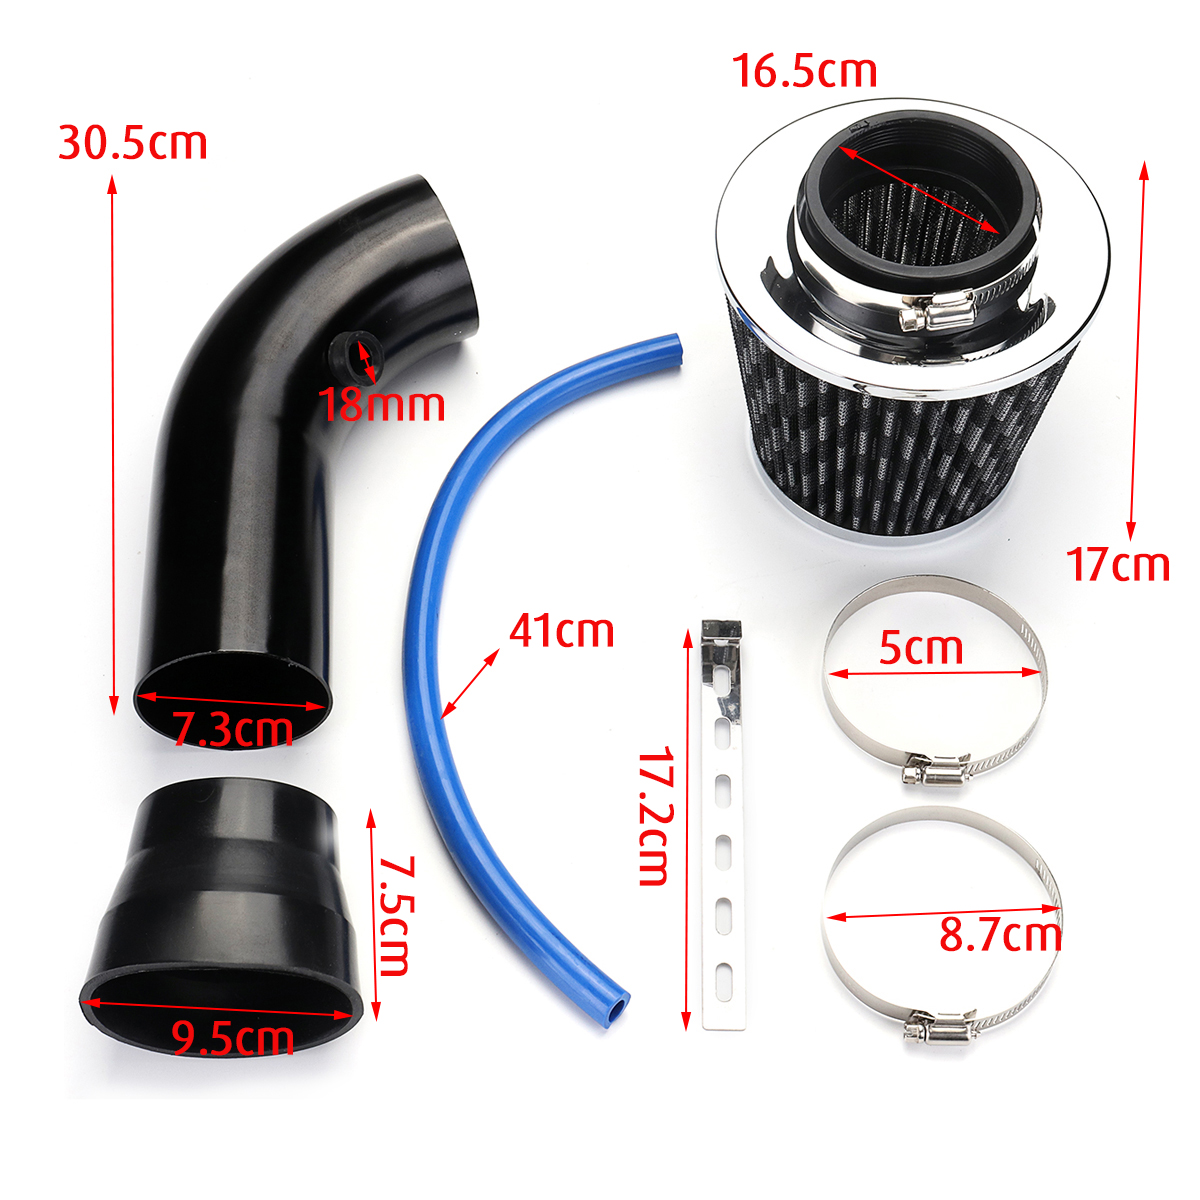 76mm-3quot-Universal-Car-Cold-Air-Intake-Filter-Alumimum-Induction-Kit-Pipe-Hose-1701385-3